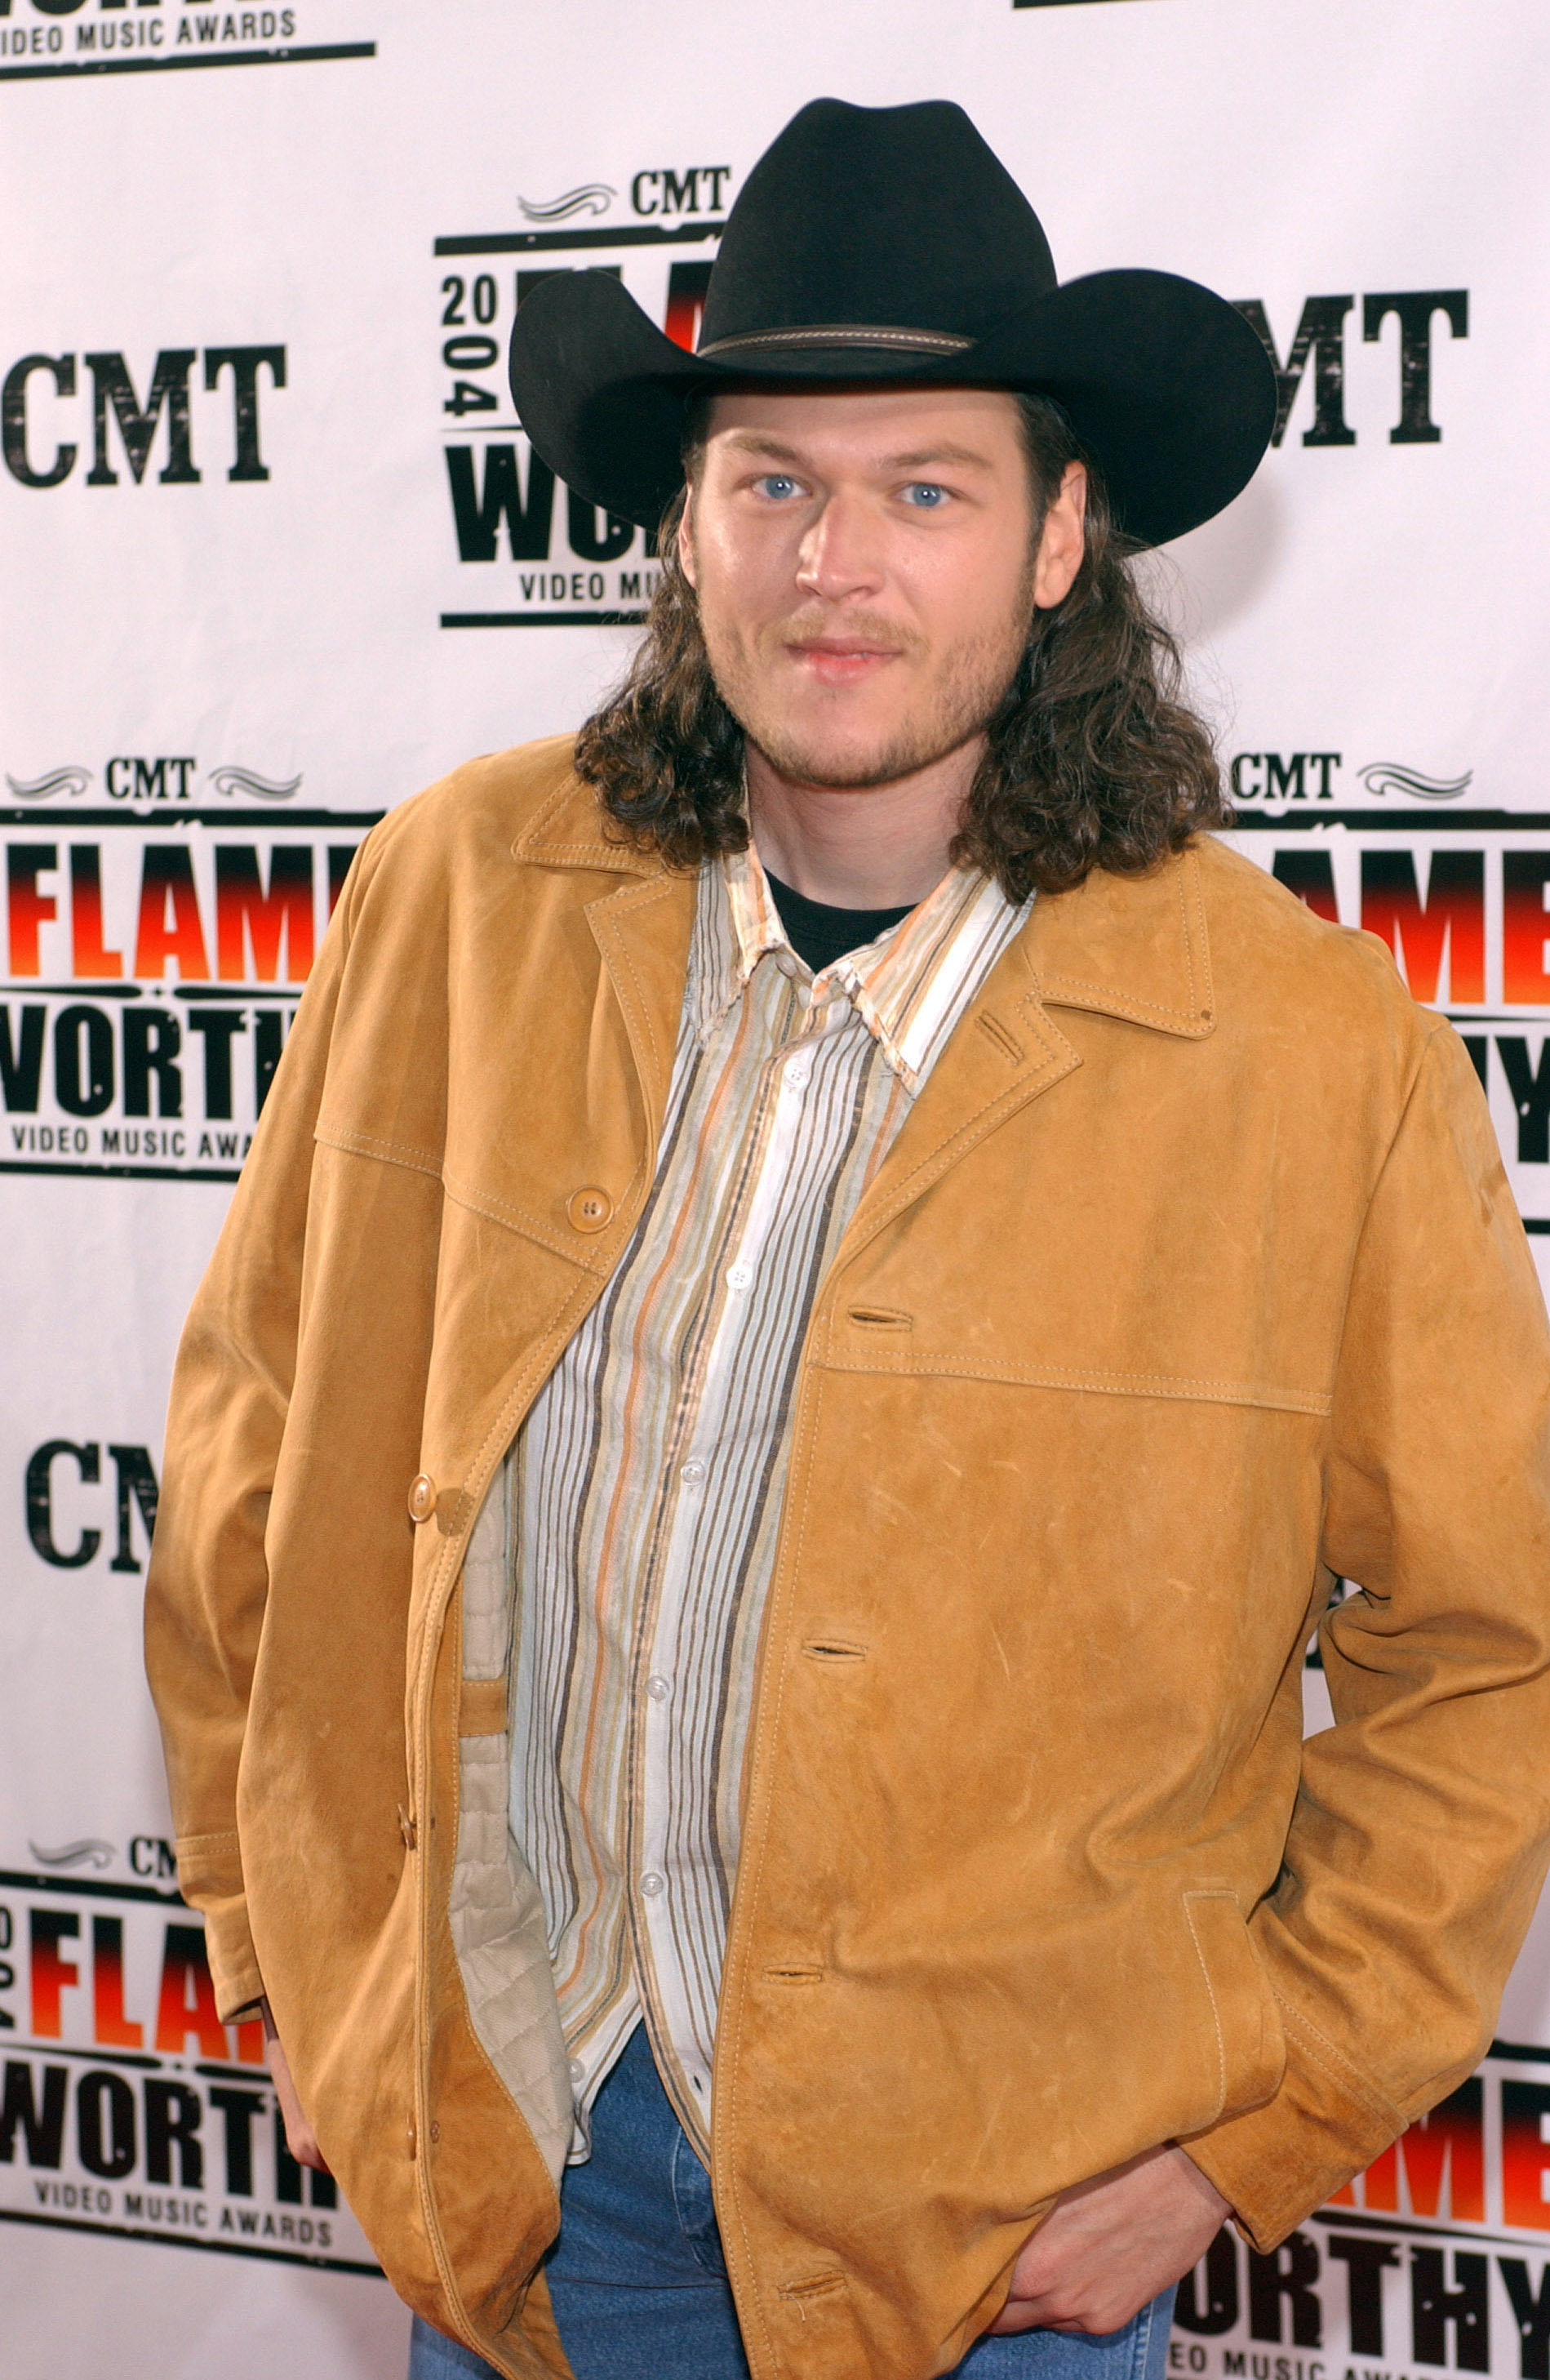 Blake Shelton during CMT 2004 Flame Worthy Video Music Awards at Gaylord Entertainment Center on April 21, 2004 in Nashville, Tennessee | Source: Getty Images